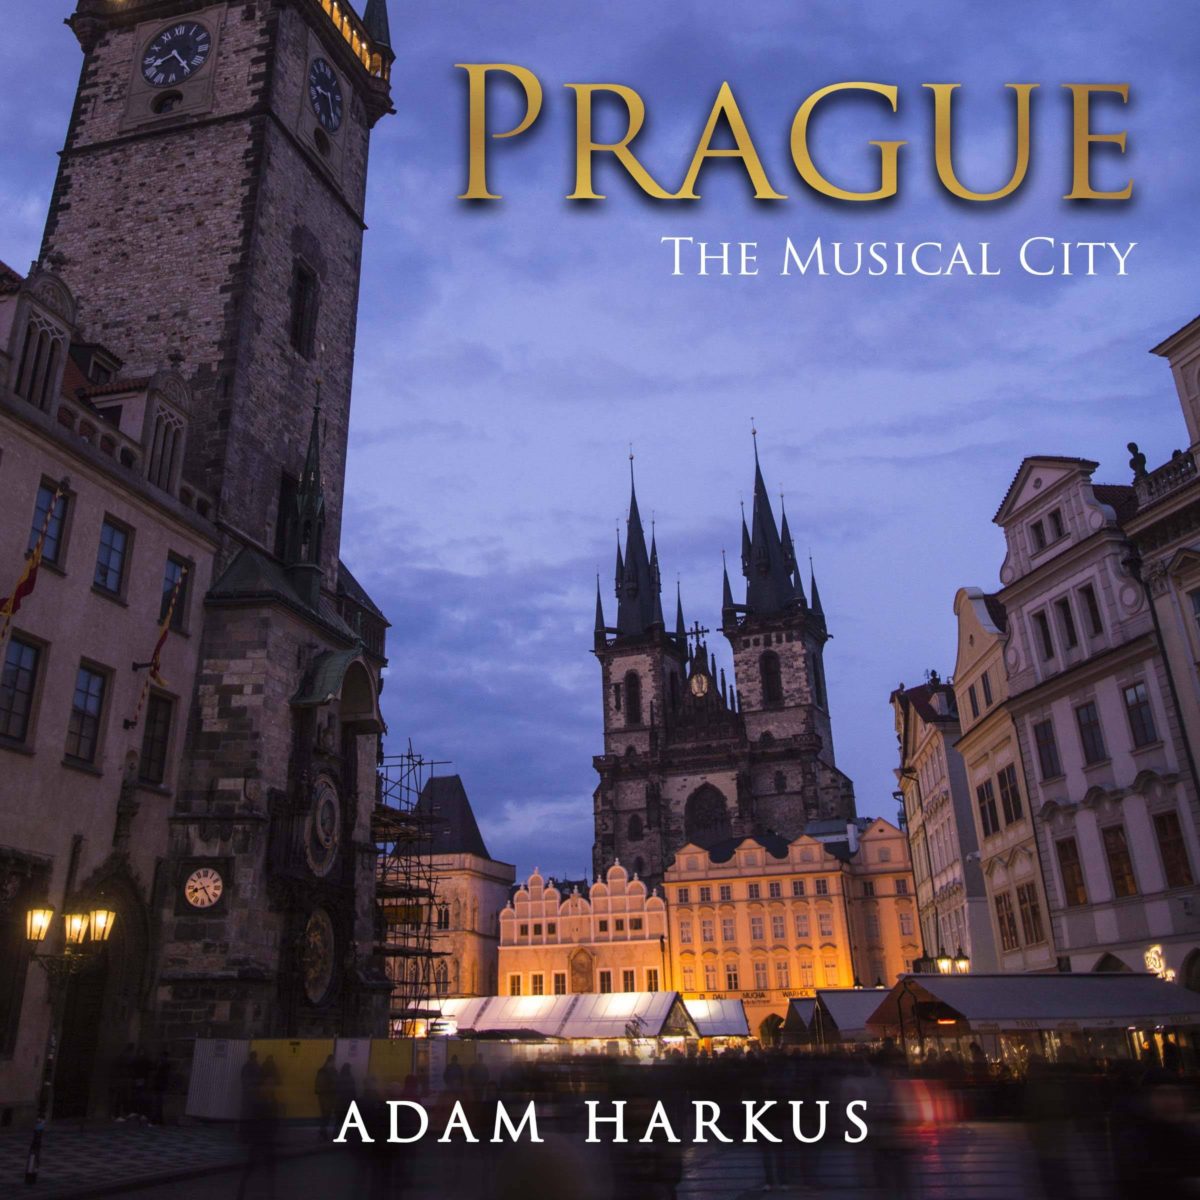 Prague: The Musical City – Out now, FREE on AudioBook!